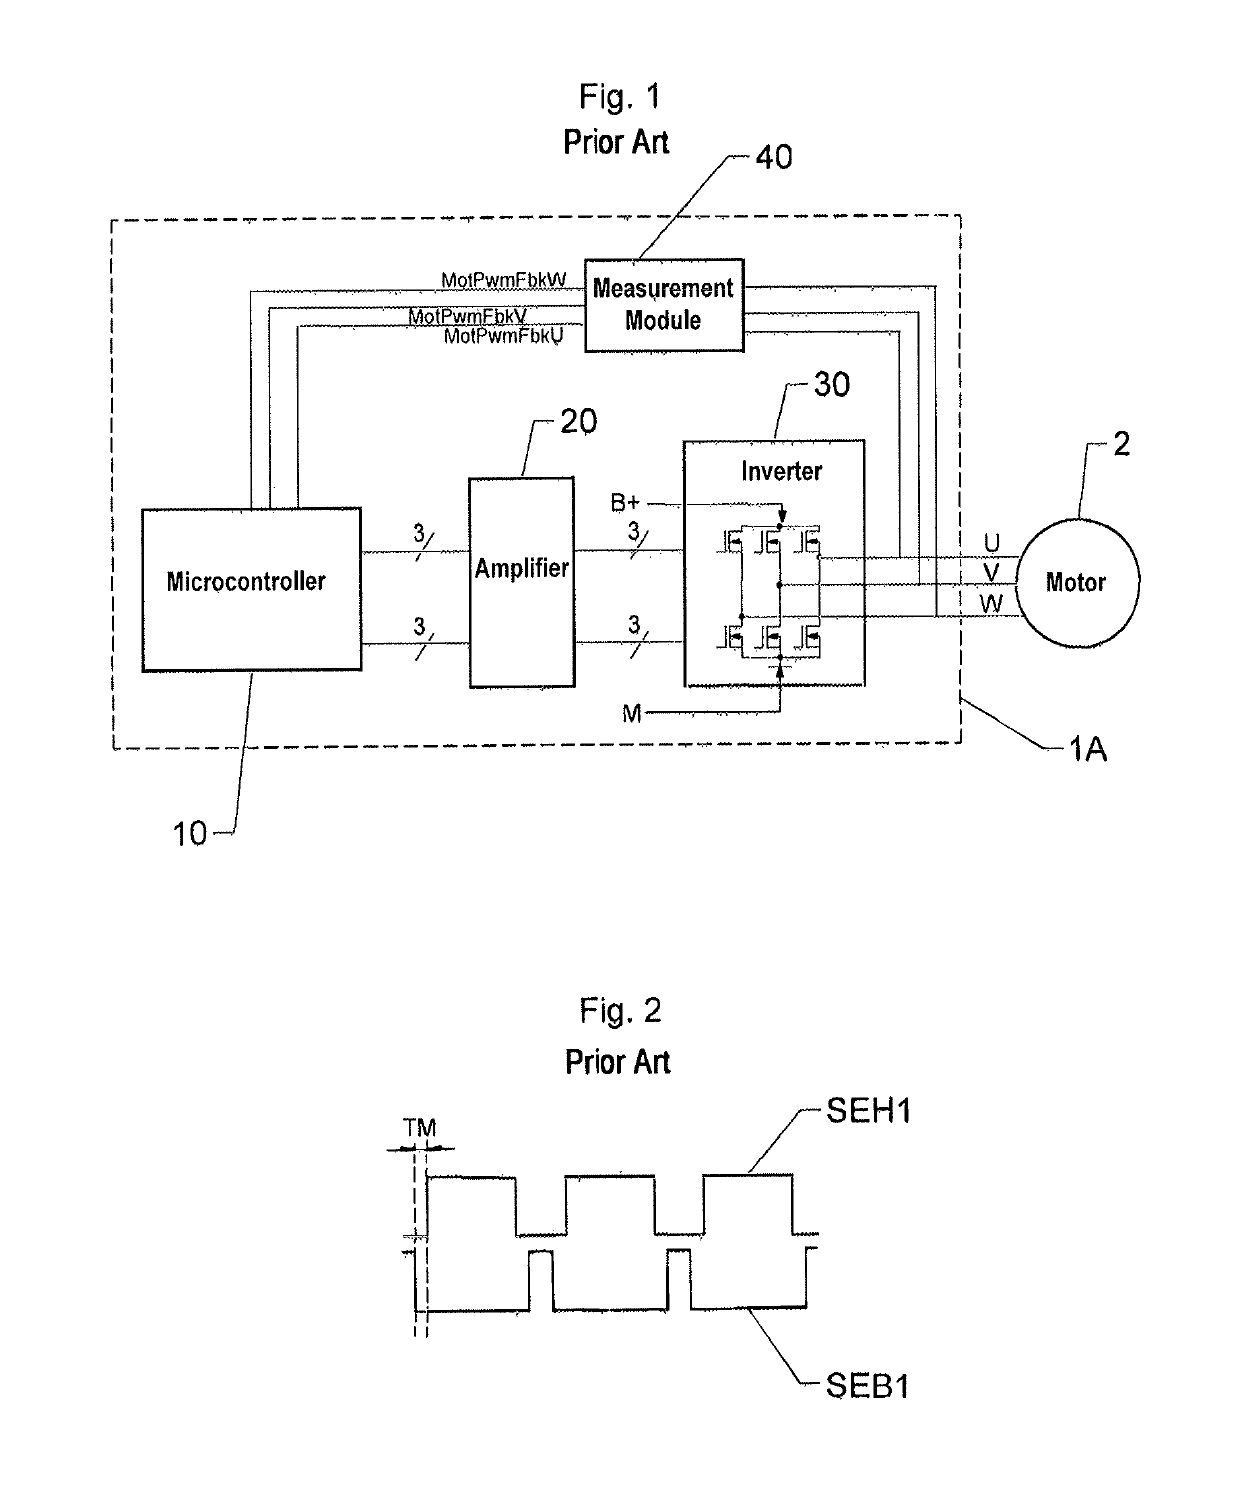 Method for diagnosing a fault in current-mode control of an electric motor in a motor vehicle